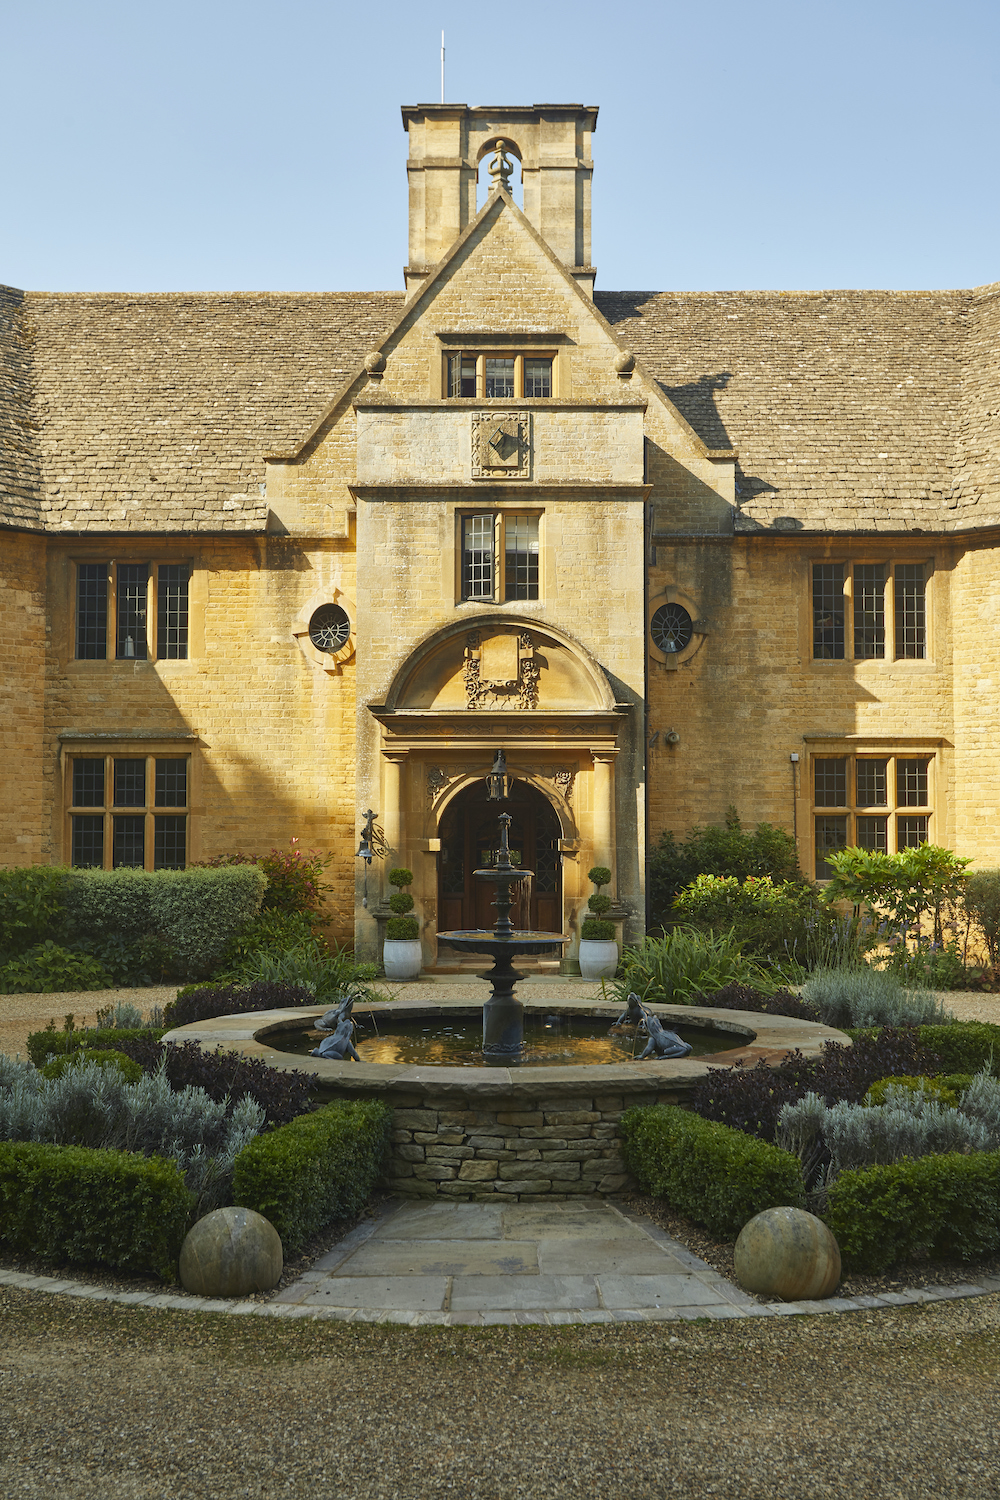 Cosseting Luxury at Foxhill Manor – Review